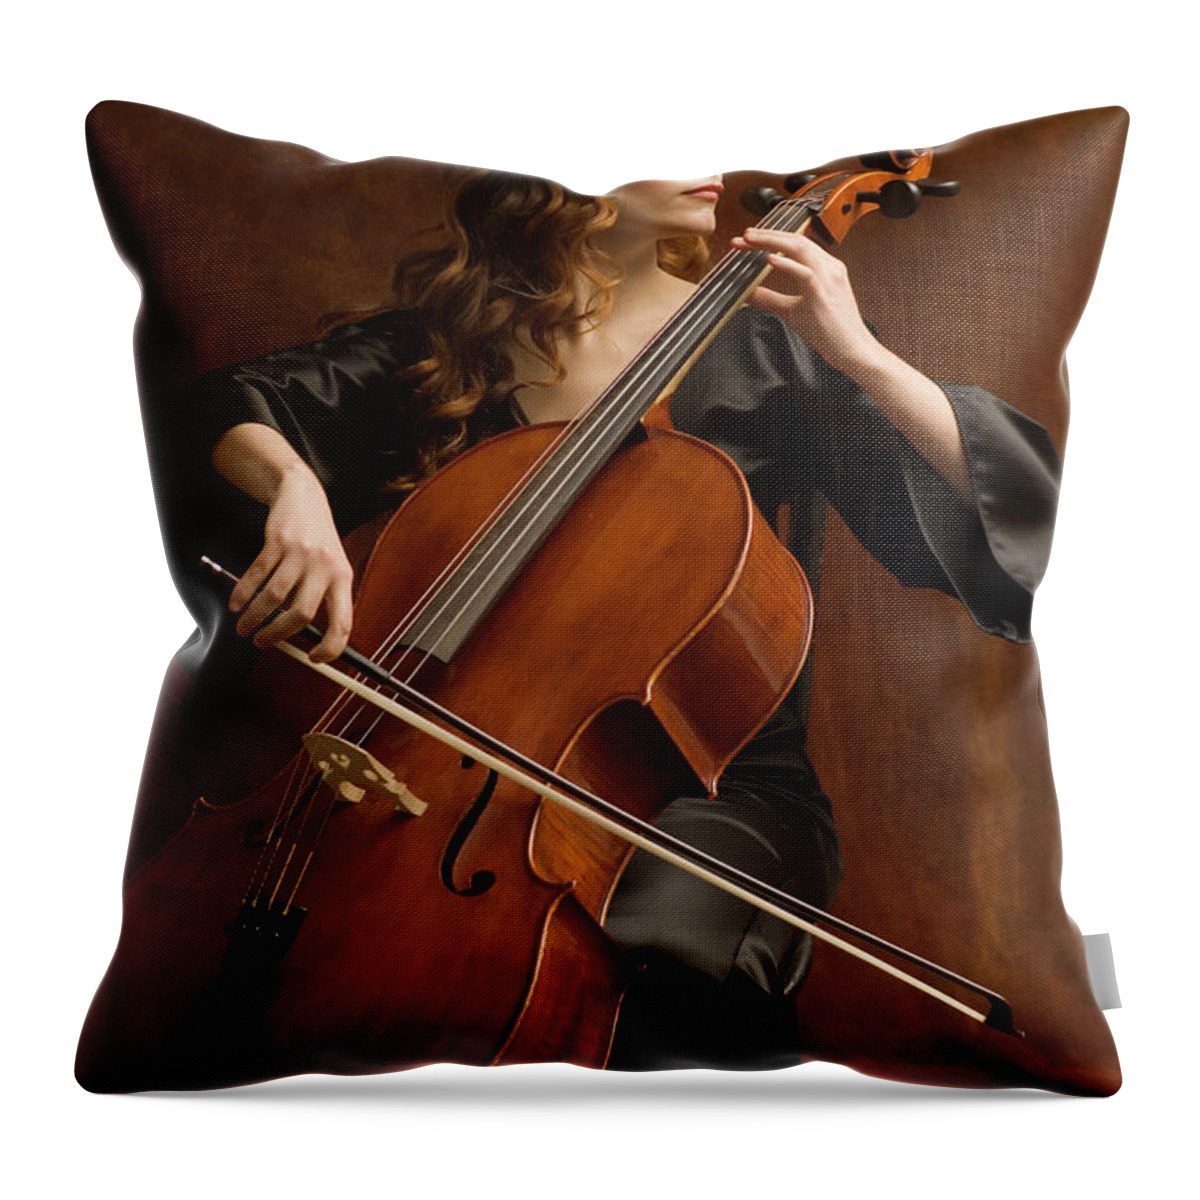 Expertise Throw Pillow featuring the photograph Young Woman Playing Cello by Pm Images